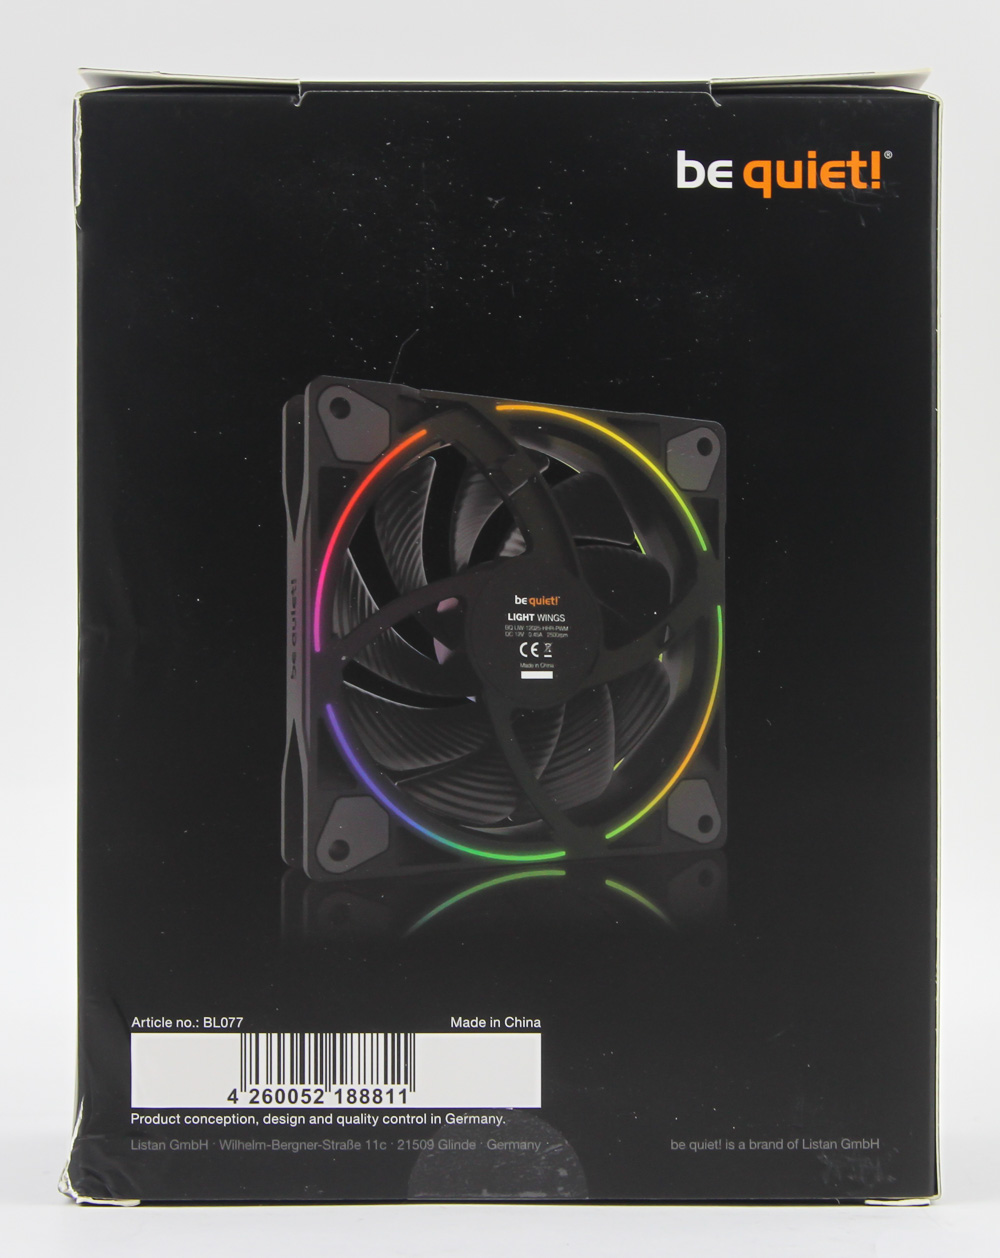 be quiet! LIGHT WINGS 120mm PWM